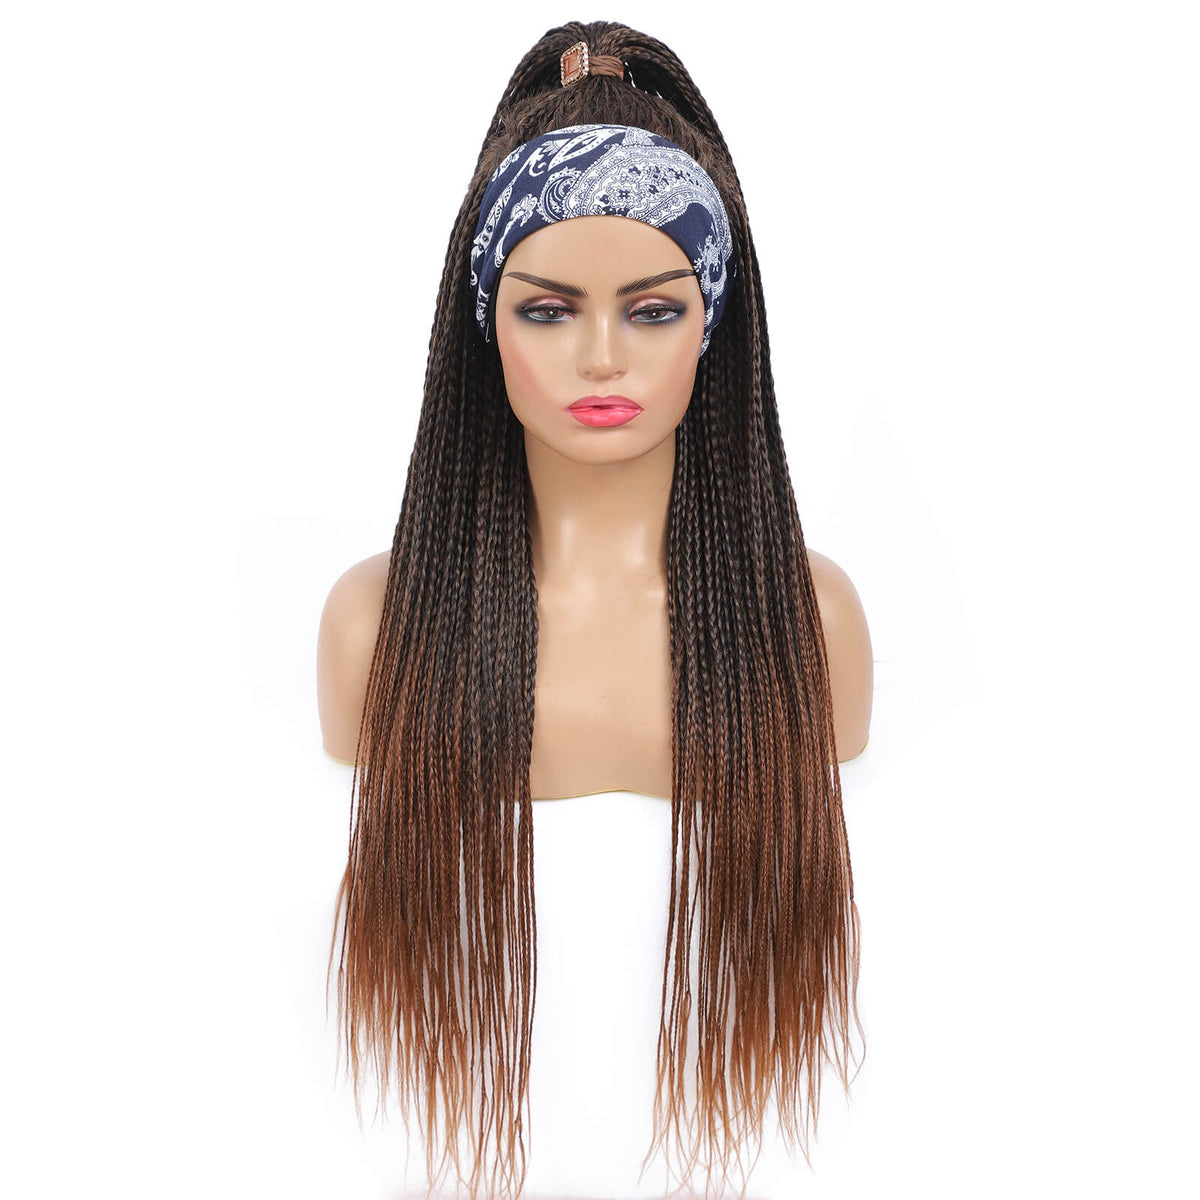 Headband Wigs Box Braided Wigs for Black Women Red Brown Color